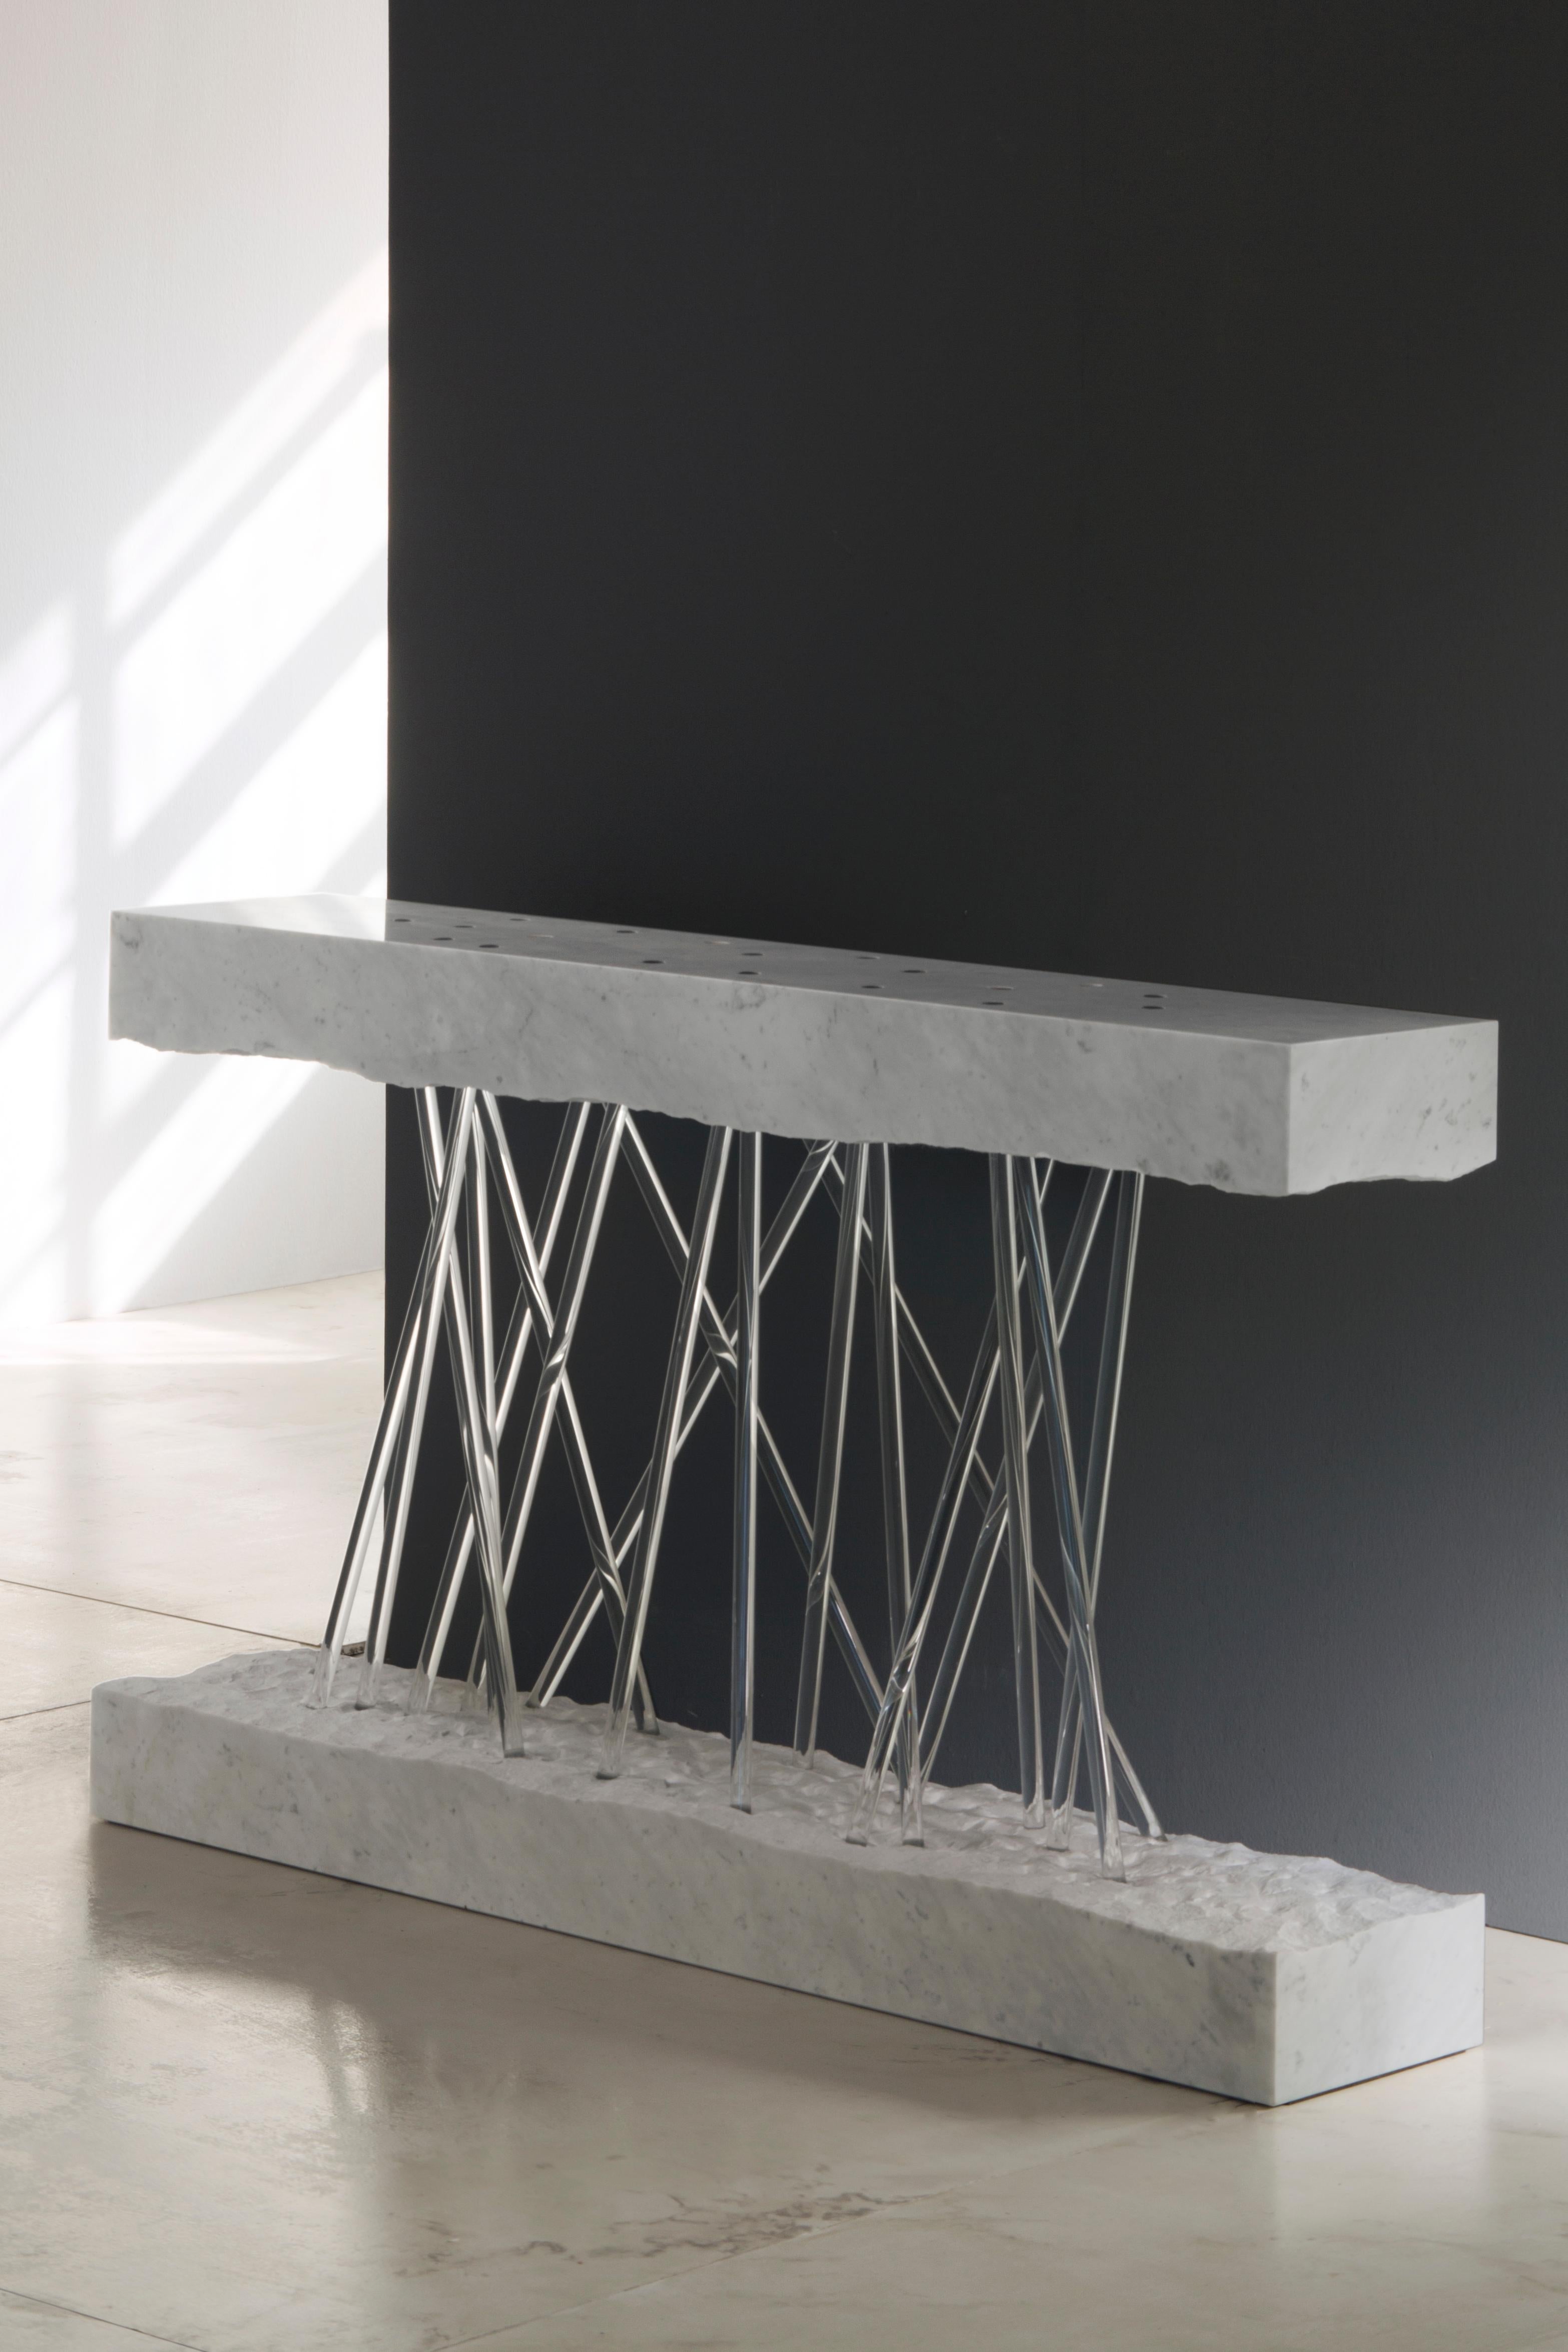 Rectangular console composed of one white Carrara marble block separated into two parts, the top is supported only by criss-crossing Borosilicate glass rods below which are set into the bottom part.
Model “Audentes fortuna iuvat” (Fortune favors